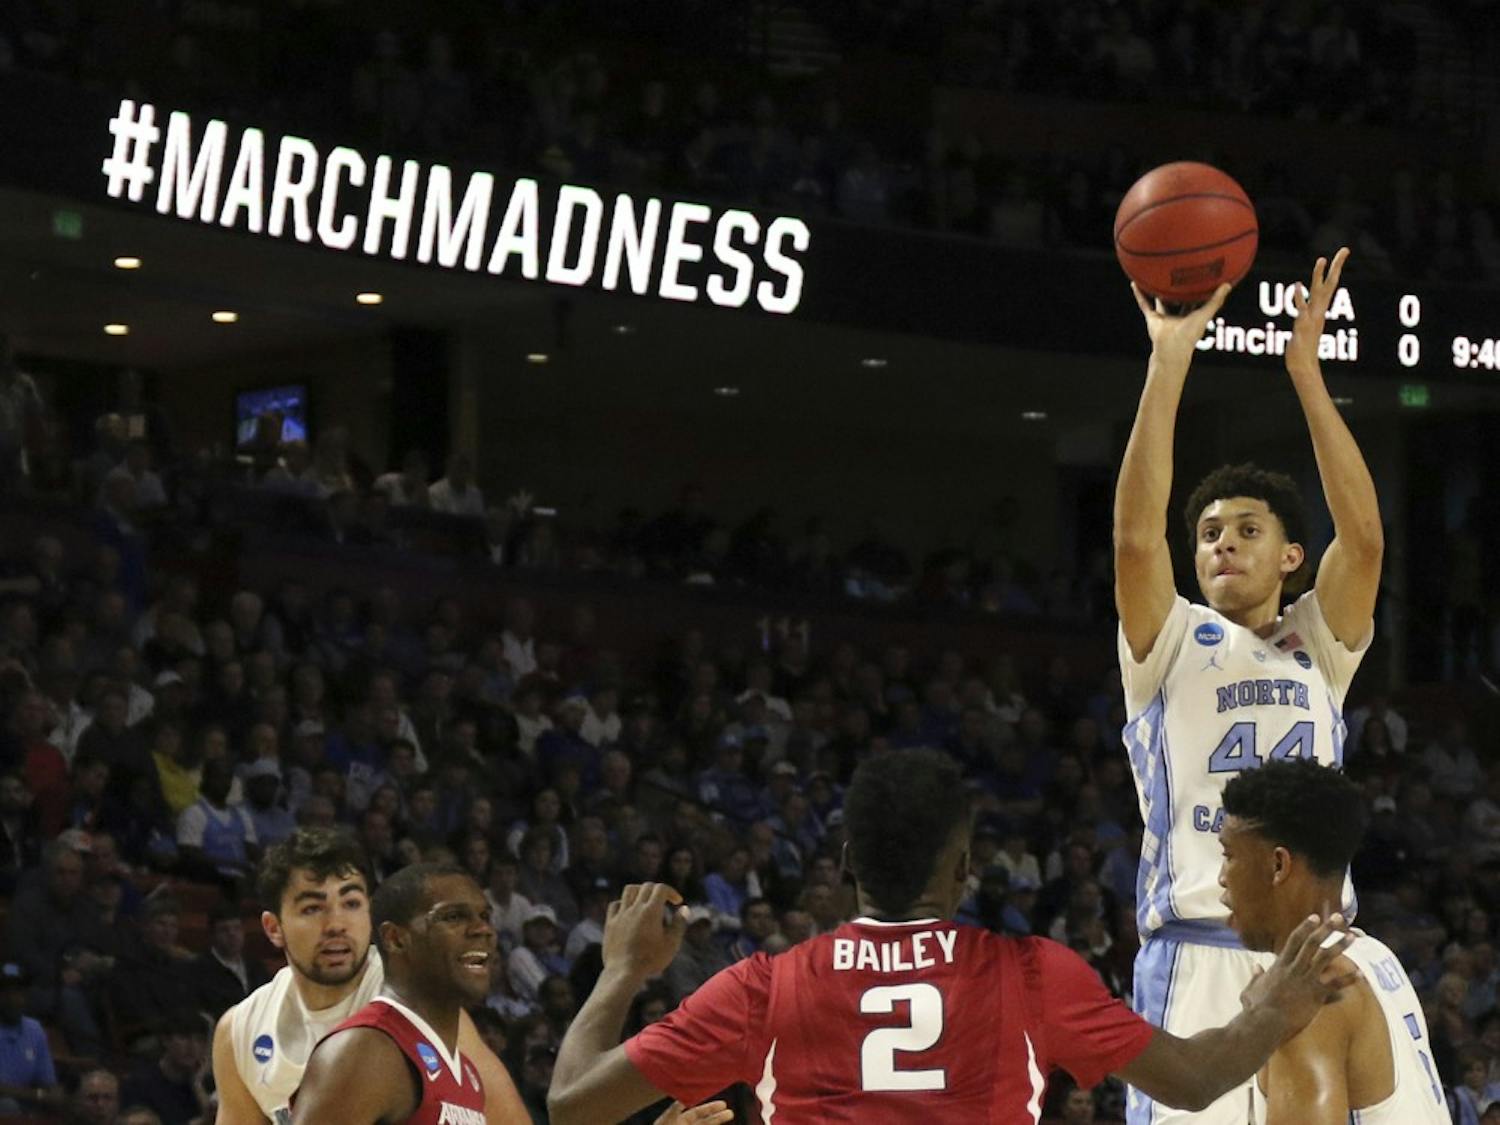 North Carolina wing Justin Jackson (44) pulls up for a three-pointer against Arkansas in the second round of the NCAA Tournament in Greenville on Sunday.